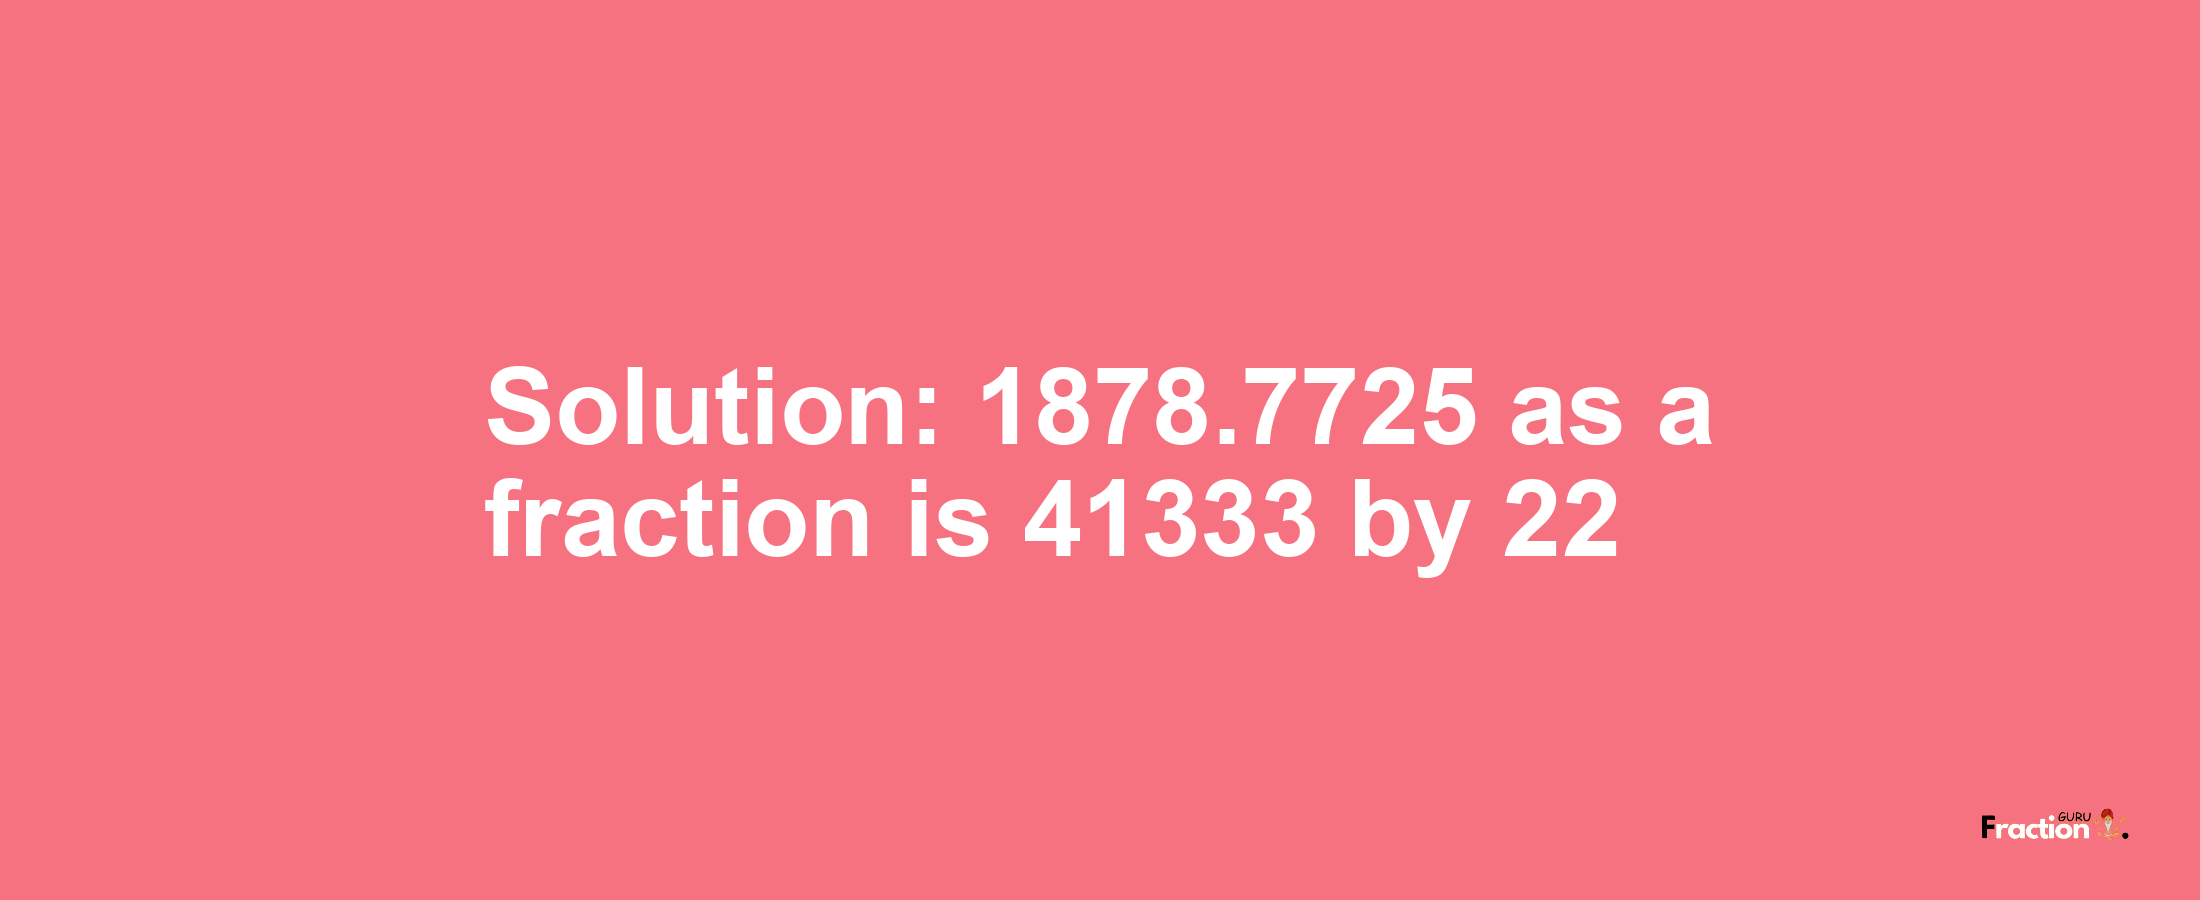 Solution:1878.7725 as a fraction is 41333/22